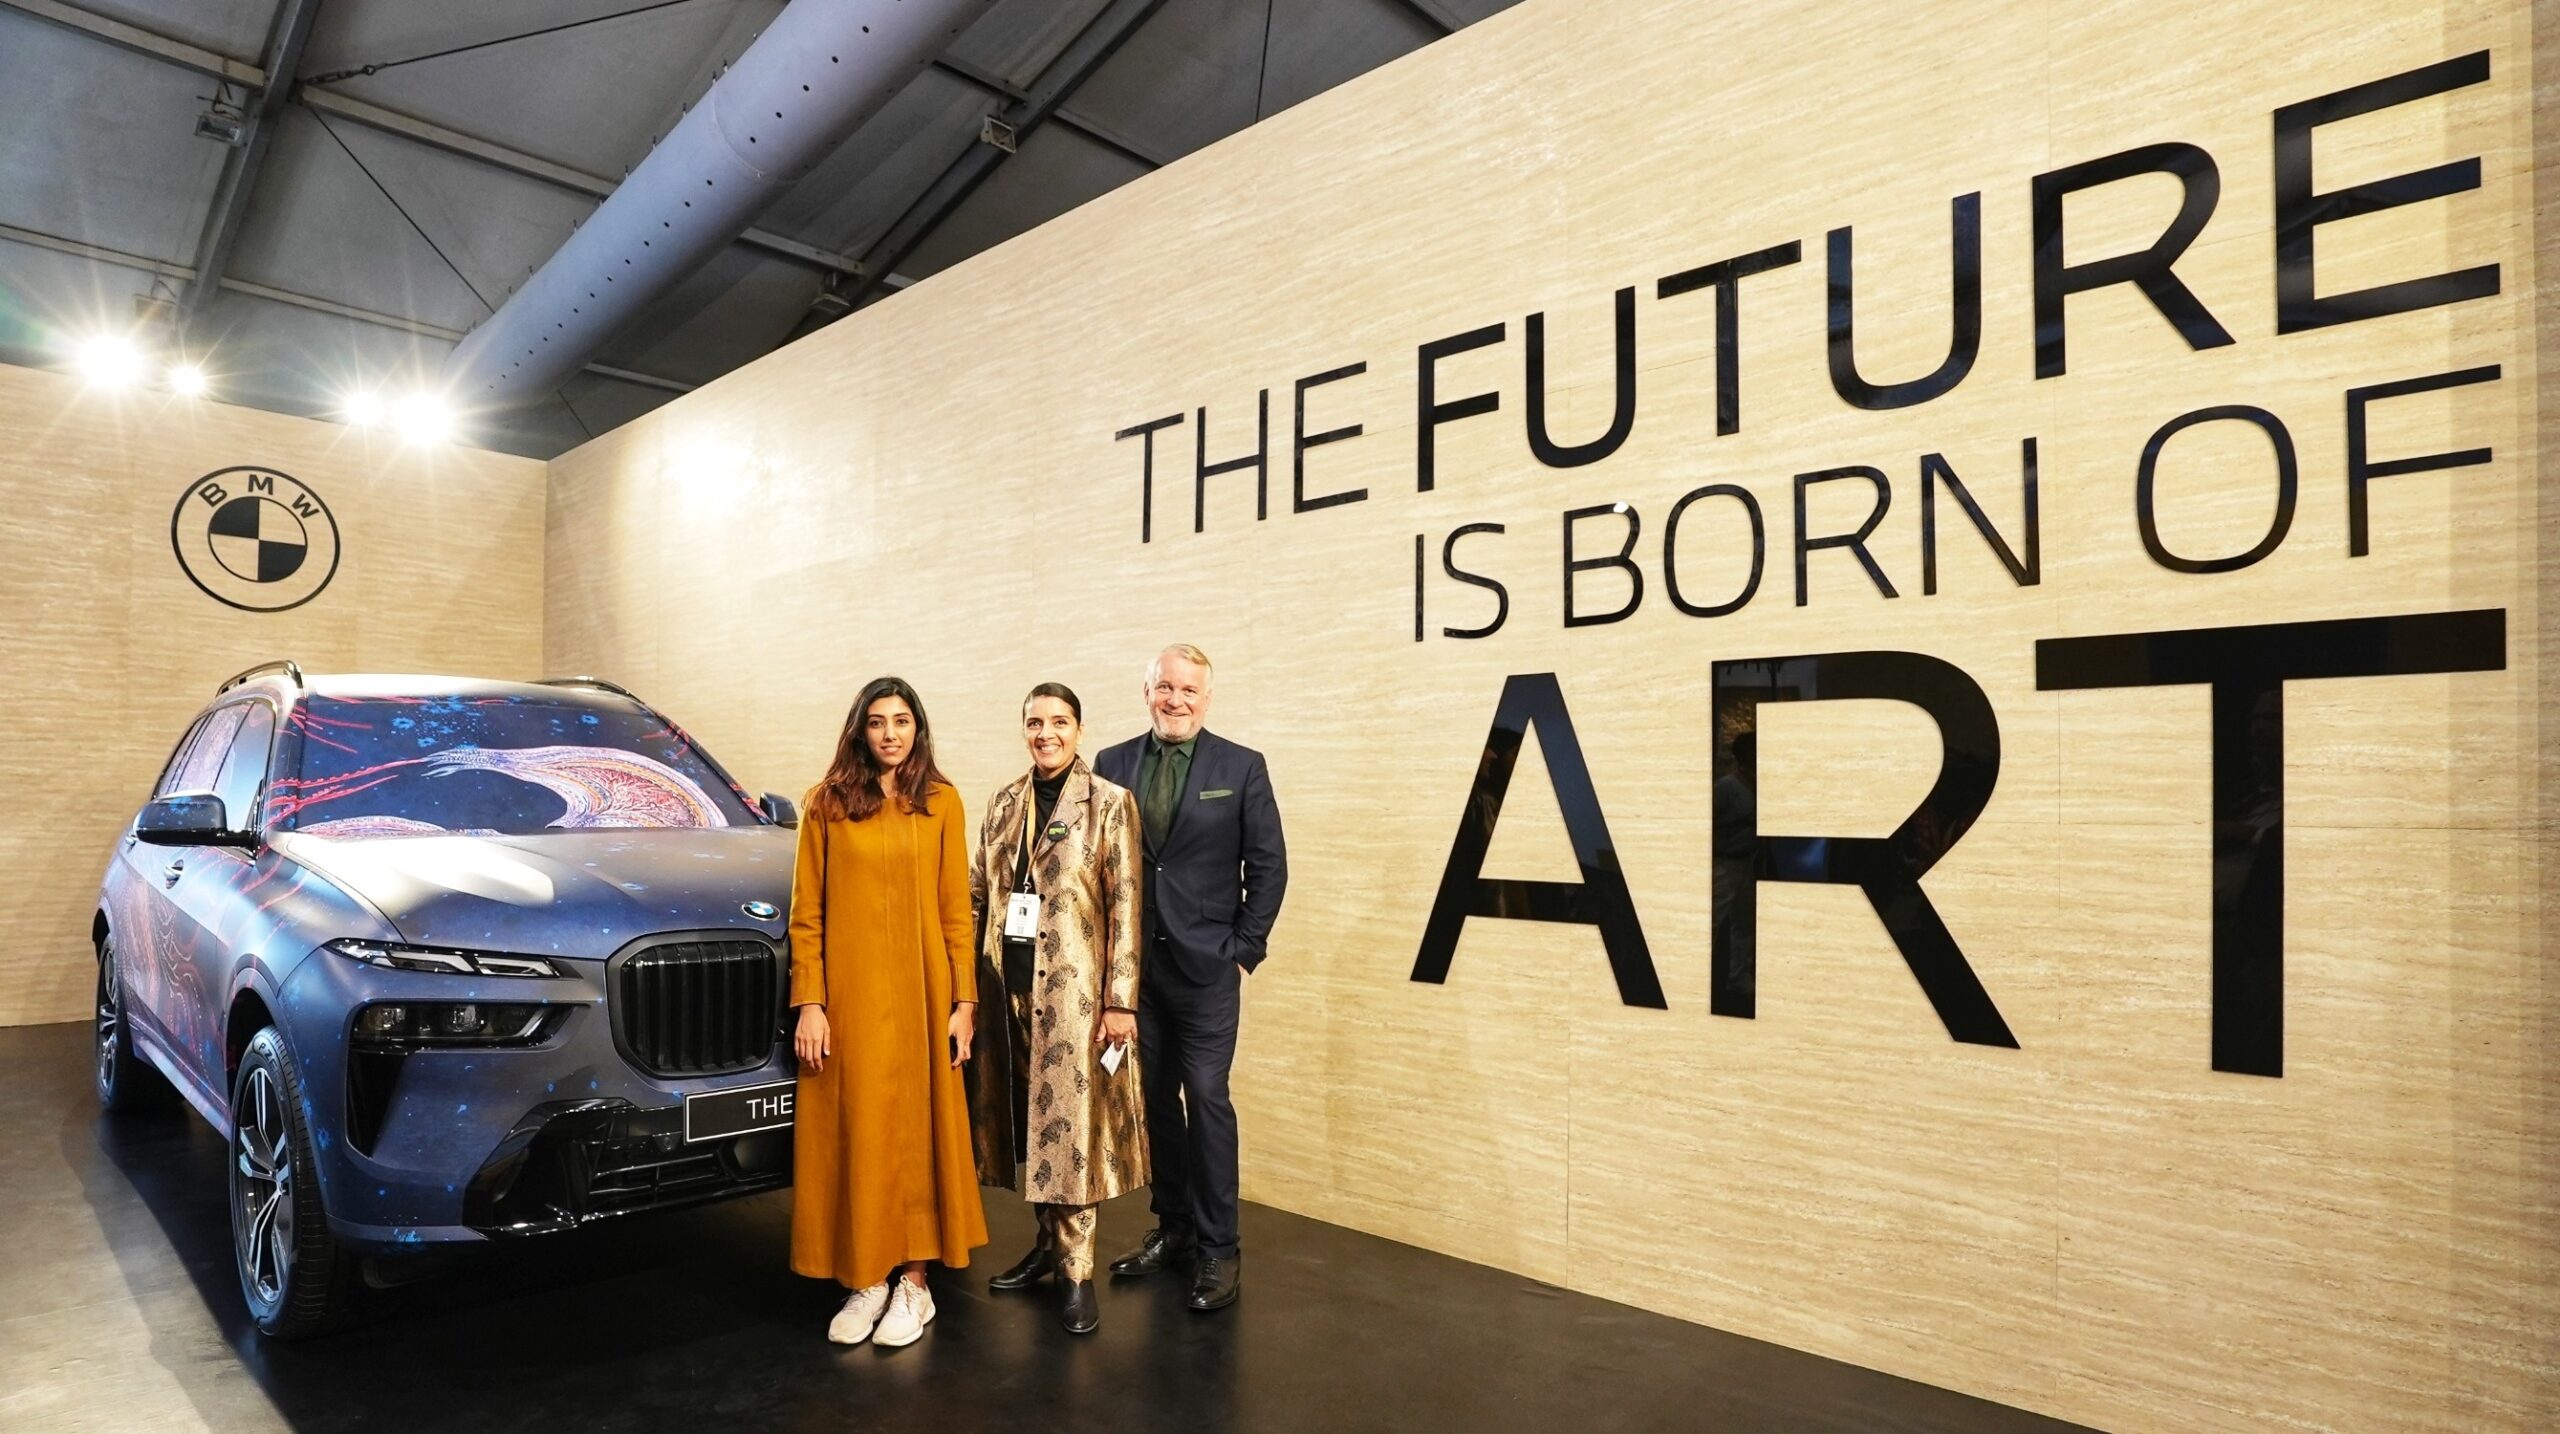 India Art Fair 2023 - BMW India as Presenting Partner. Second “The Future is Born of Art” commission on display. BMW Art Talk entitled “Raw and Radical”. 